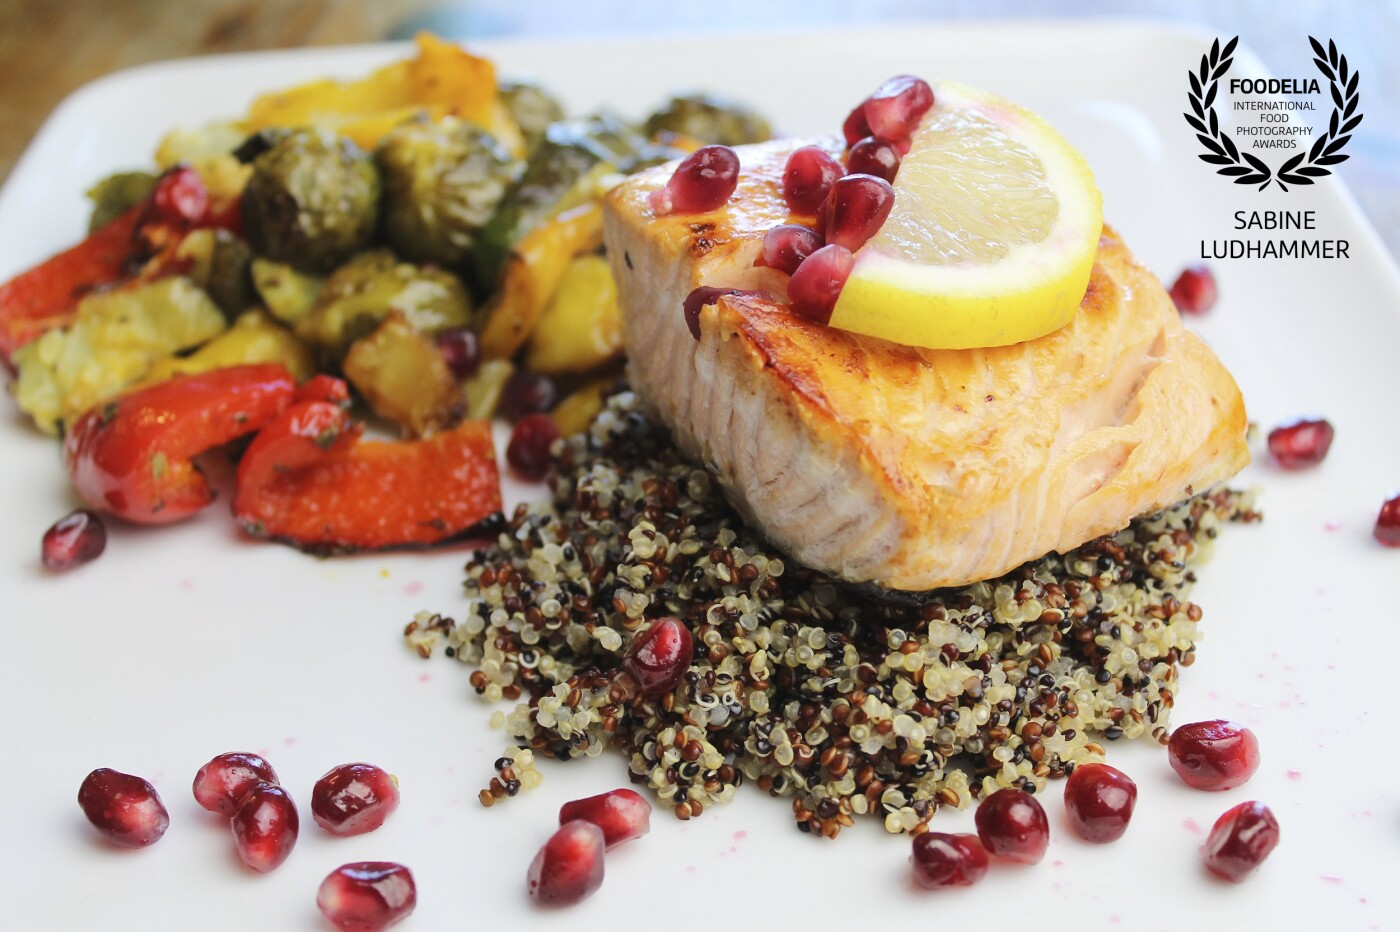 This Superfood-masterpiece is as delicious as it looks. A juicy citrus-salmon on top of Quinoa tricolore, paired up with different, colorful oven-roasted vegetables is garnished with pomegranate seeds. Different tastes combined in one dish. Healthy, colorful, simply delicious food.